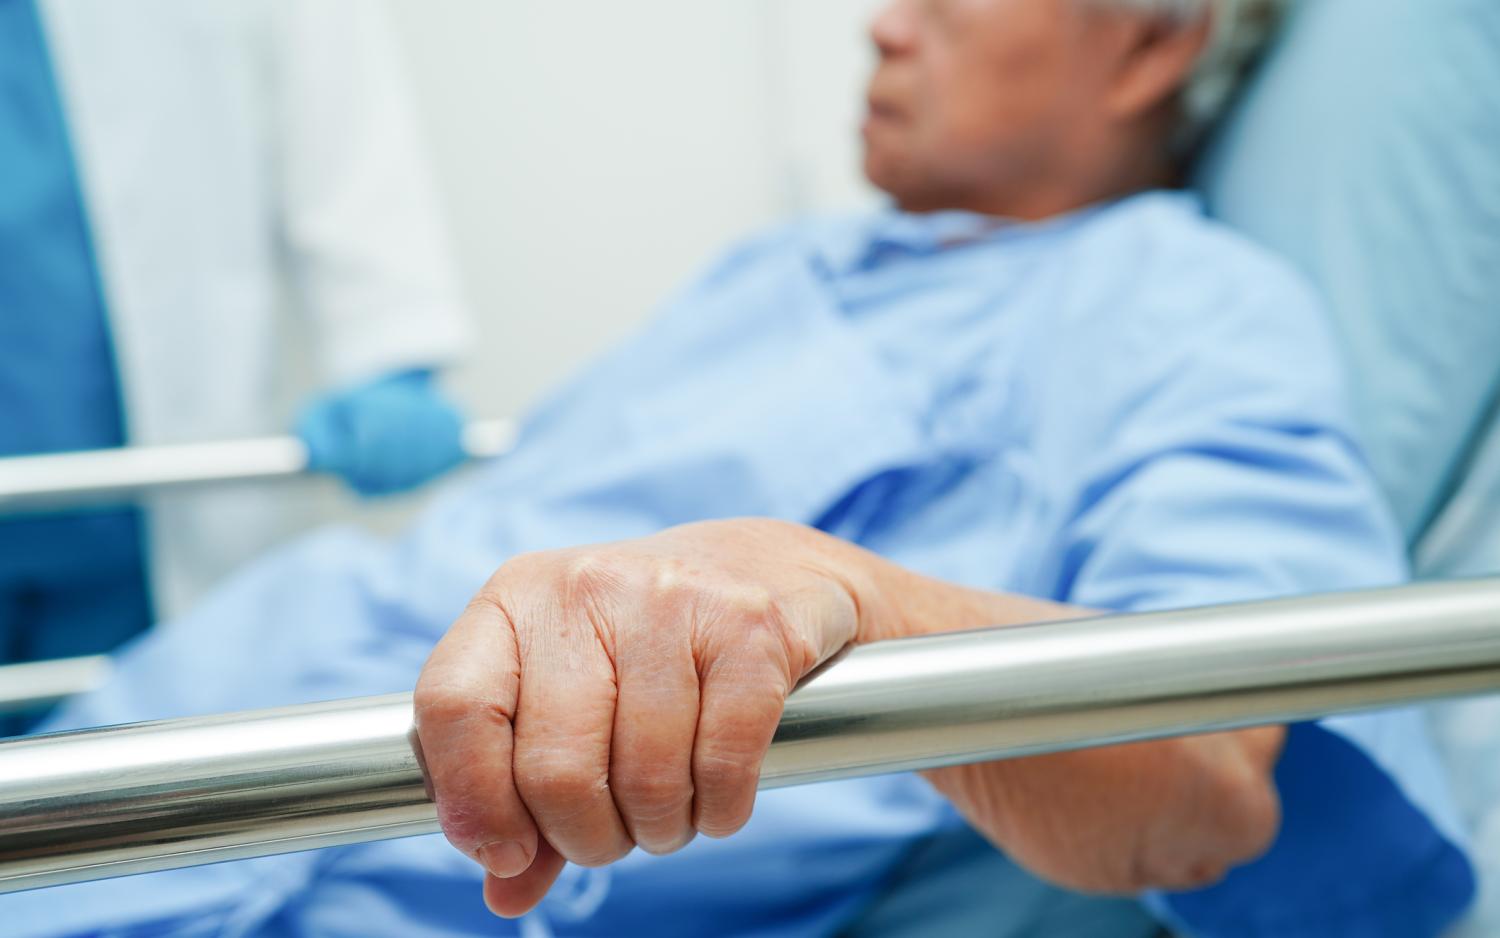 Patient holding hospital bed rail